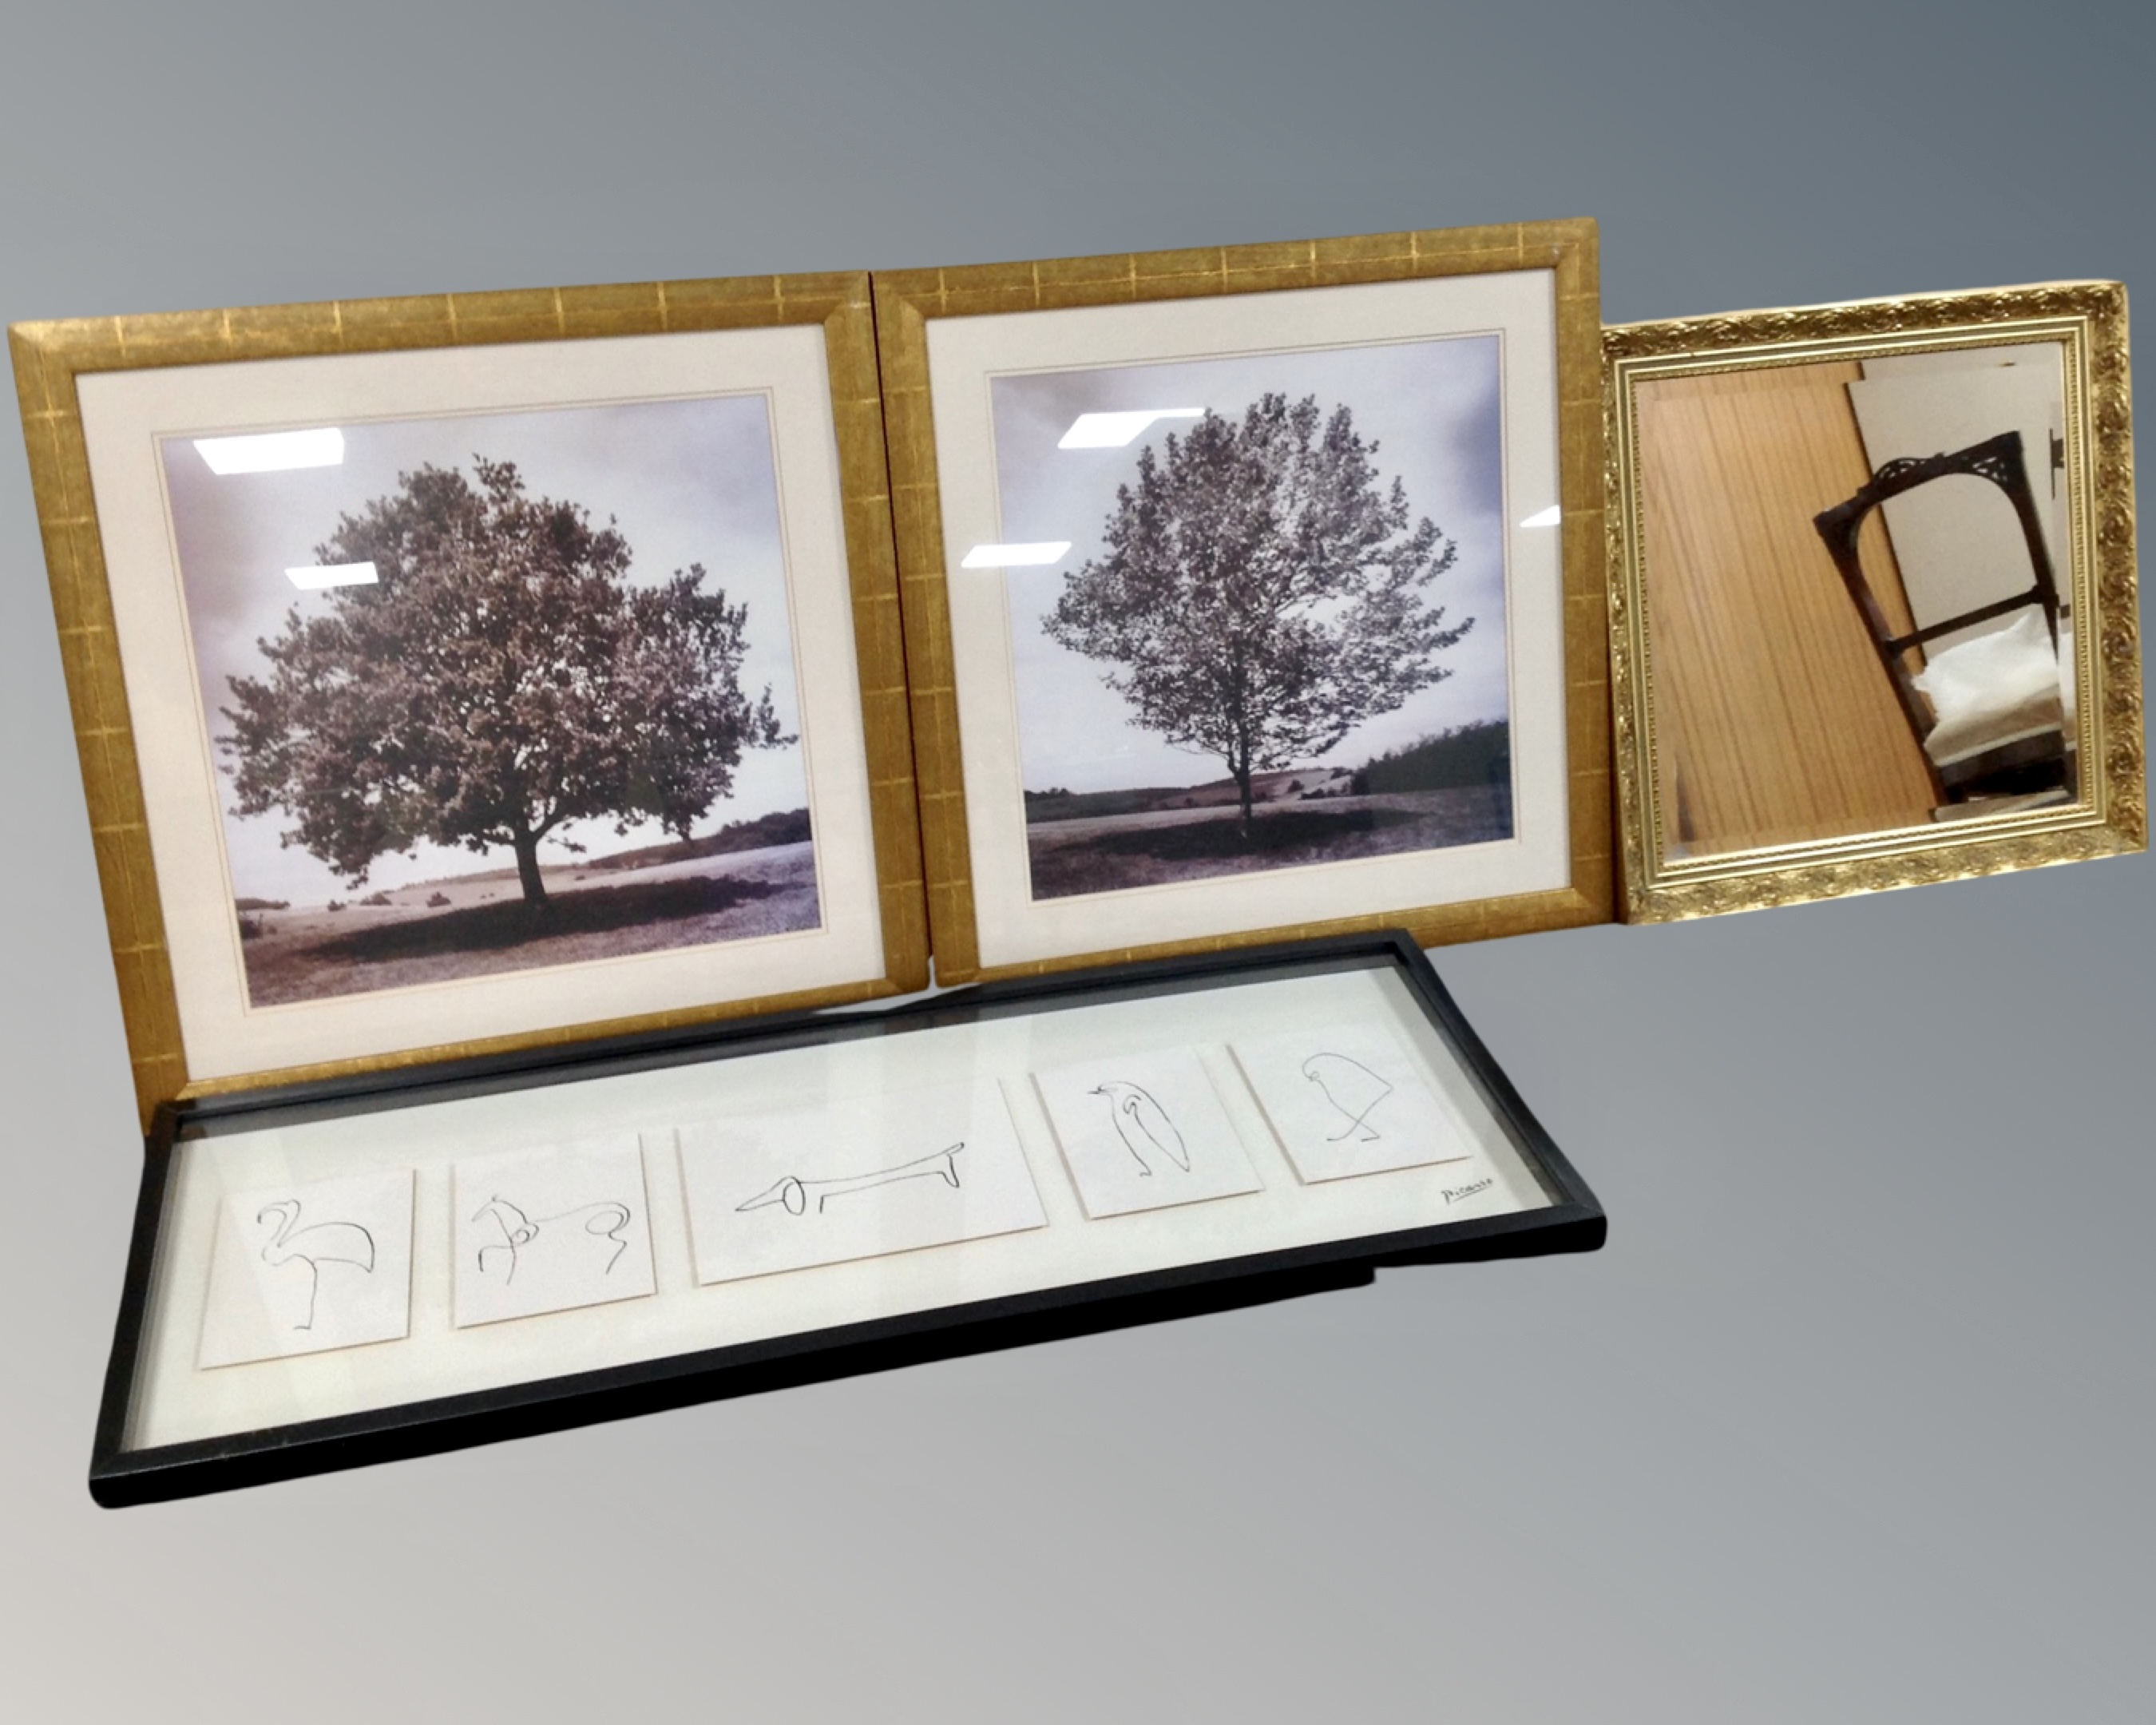 A gilt framed bevelled mirror together with two monochrome photographs depicting trees and a